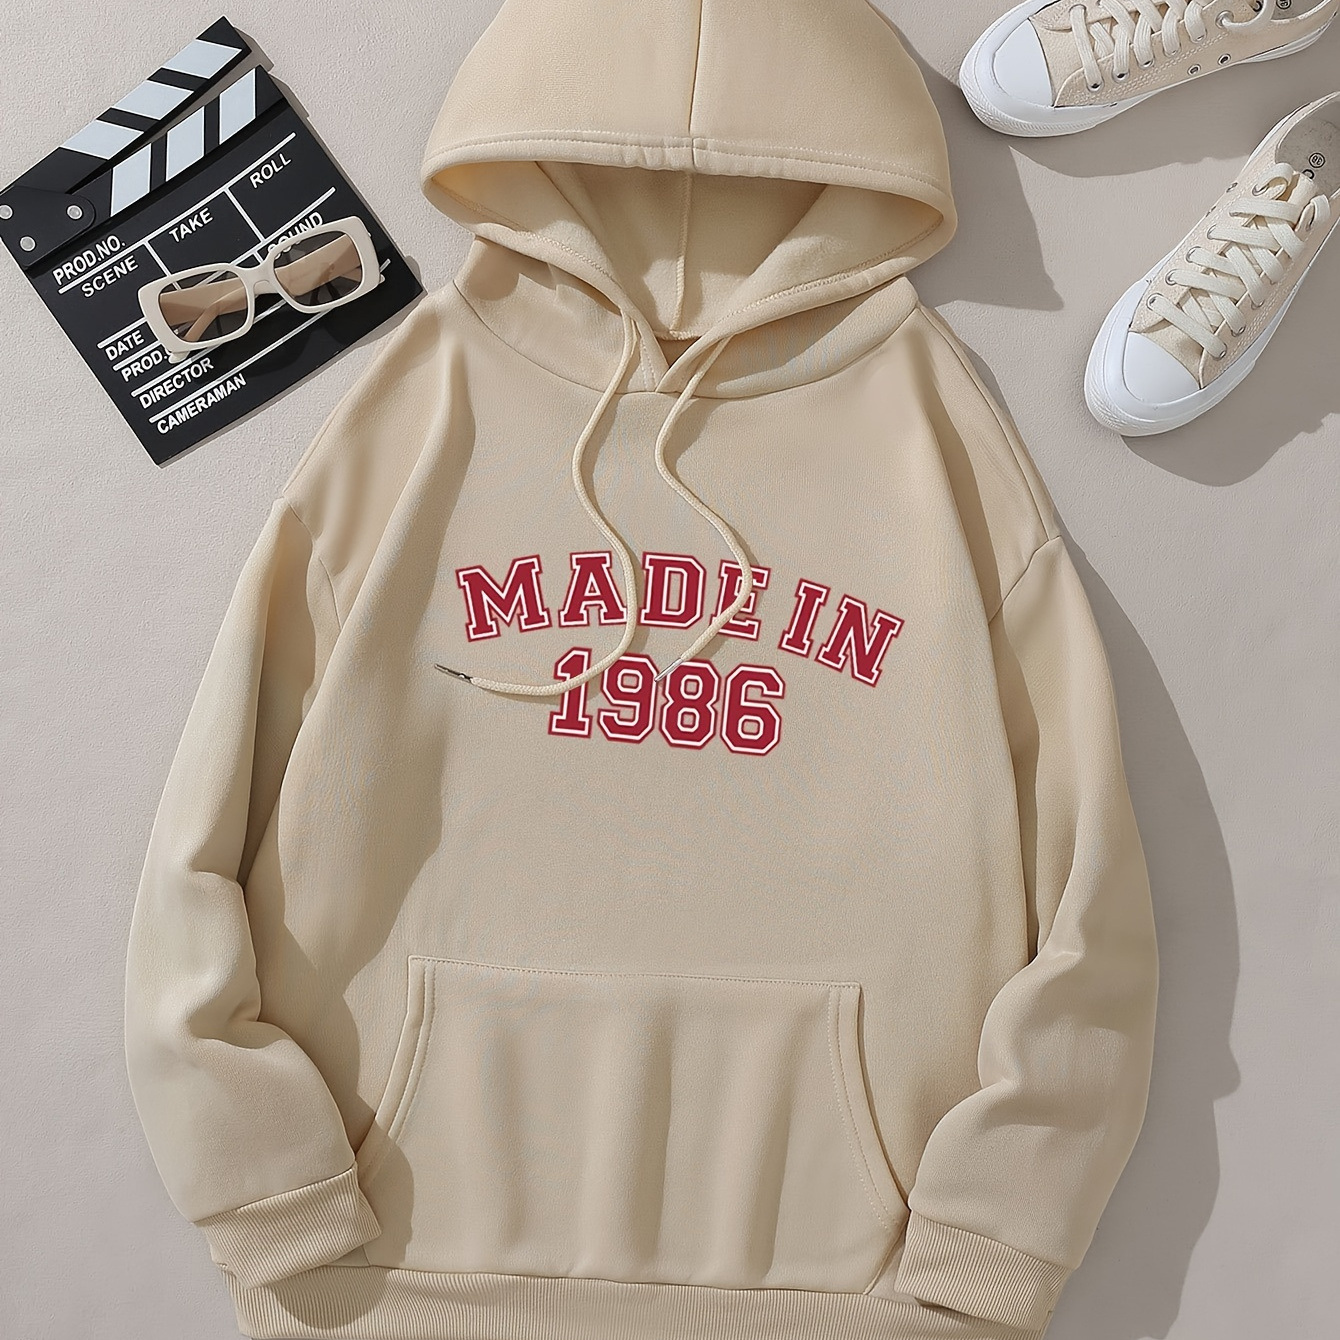 

Made In 1986 Print Hoodie, Drawstring Casual Hooded Sweatshirt For Winter & Fall, Women's Clothing